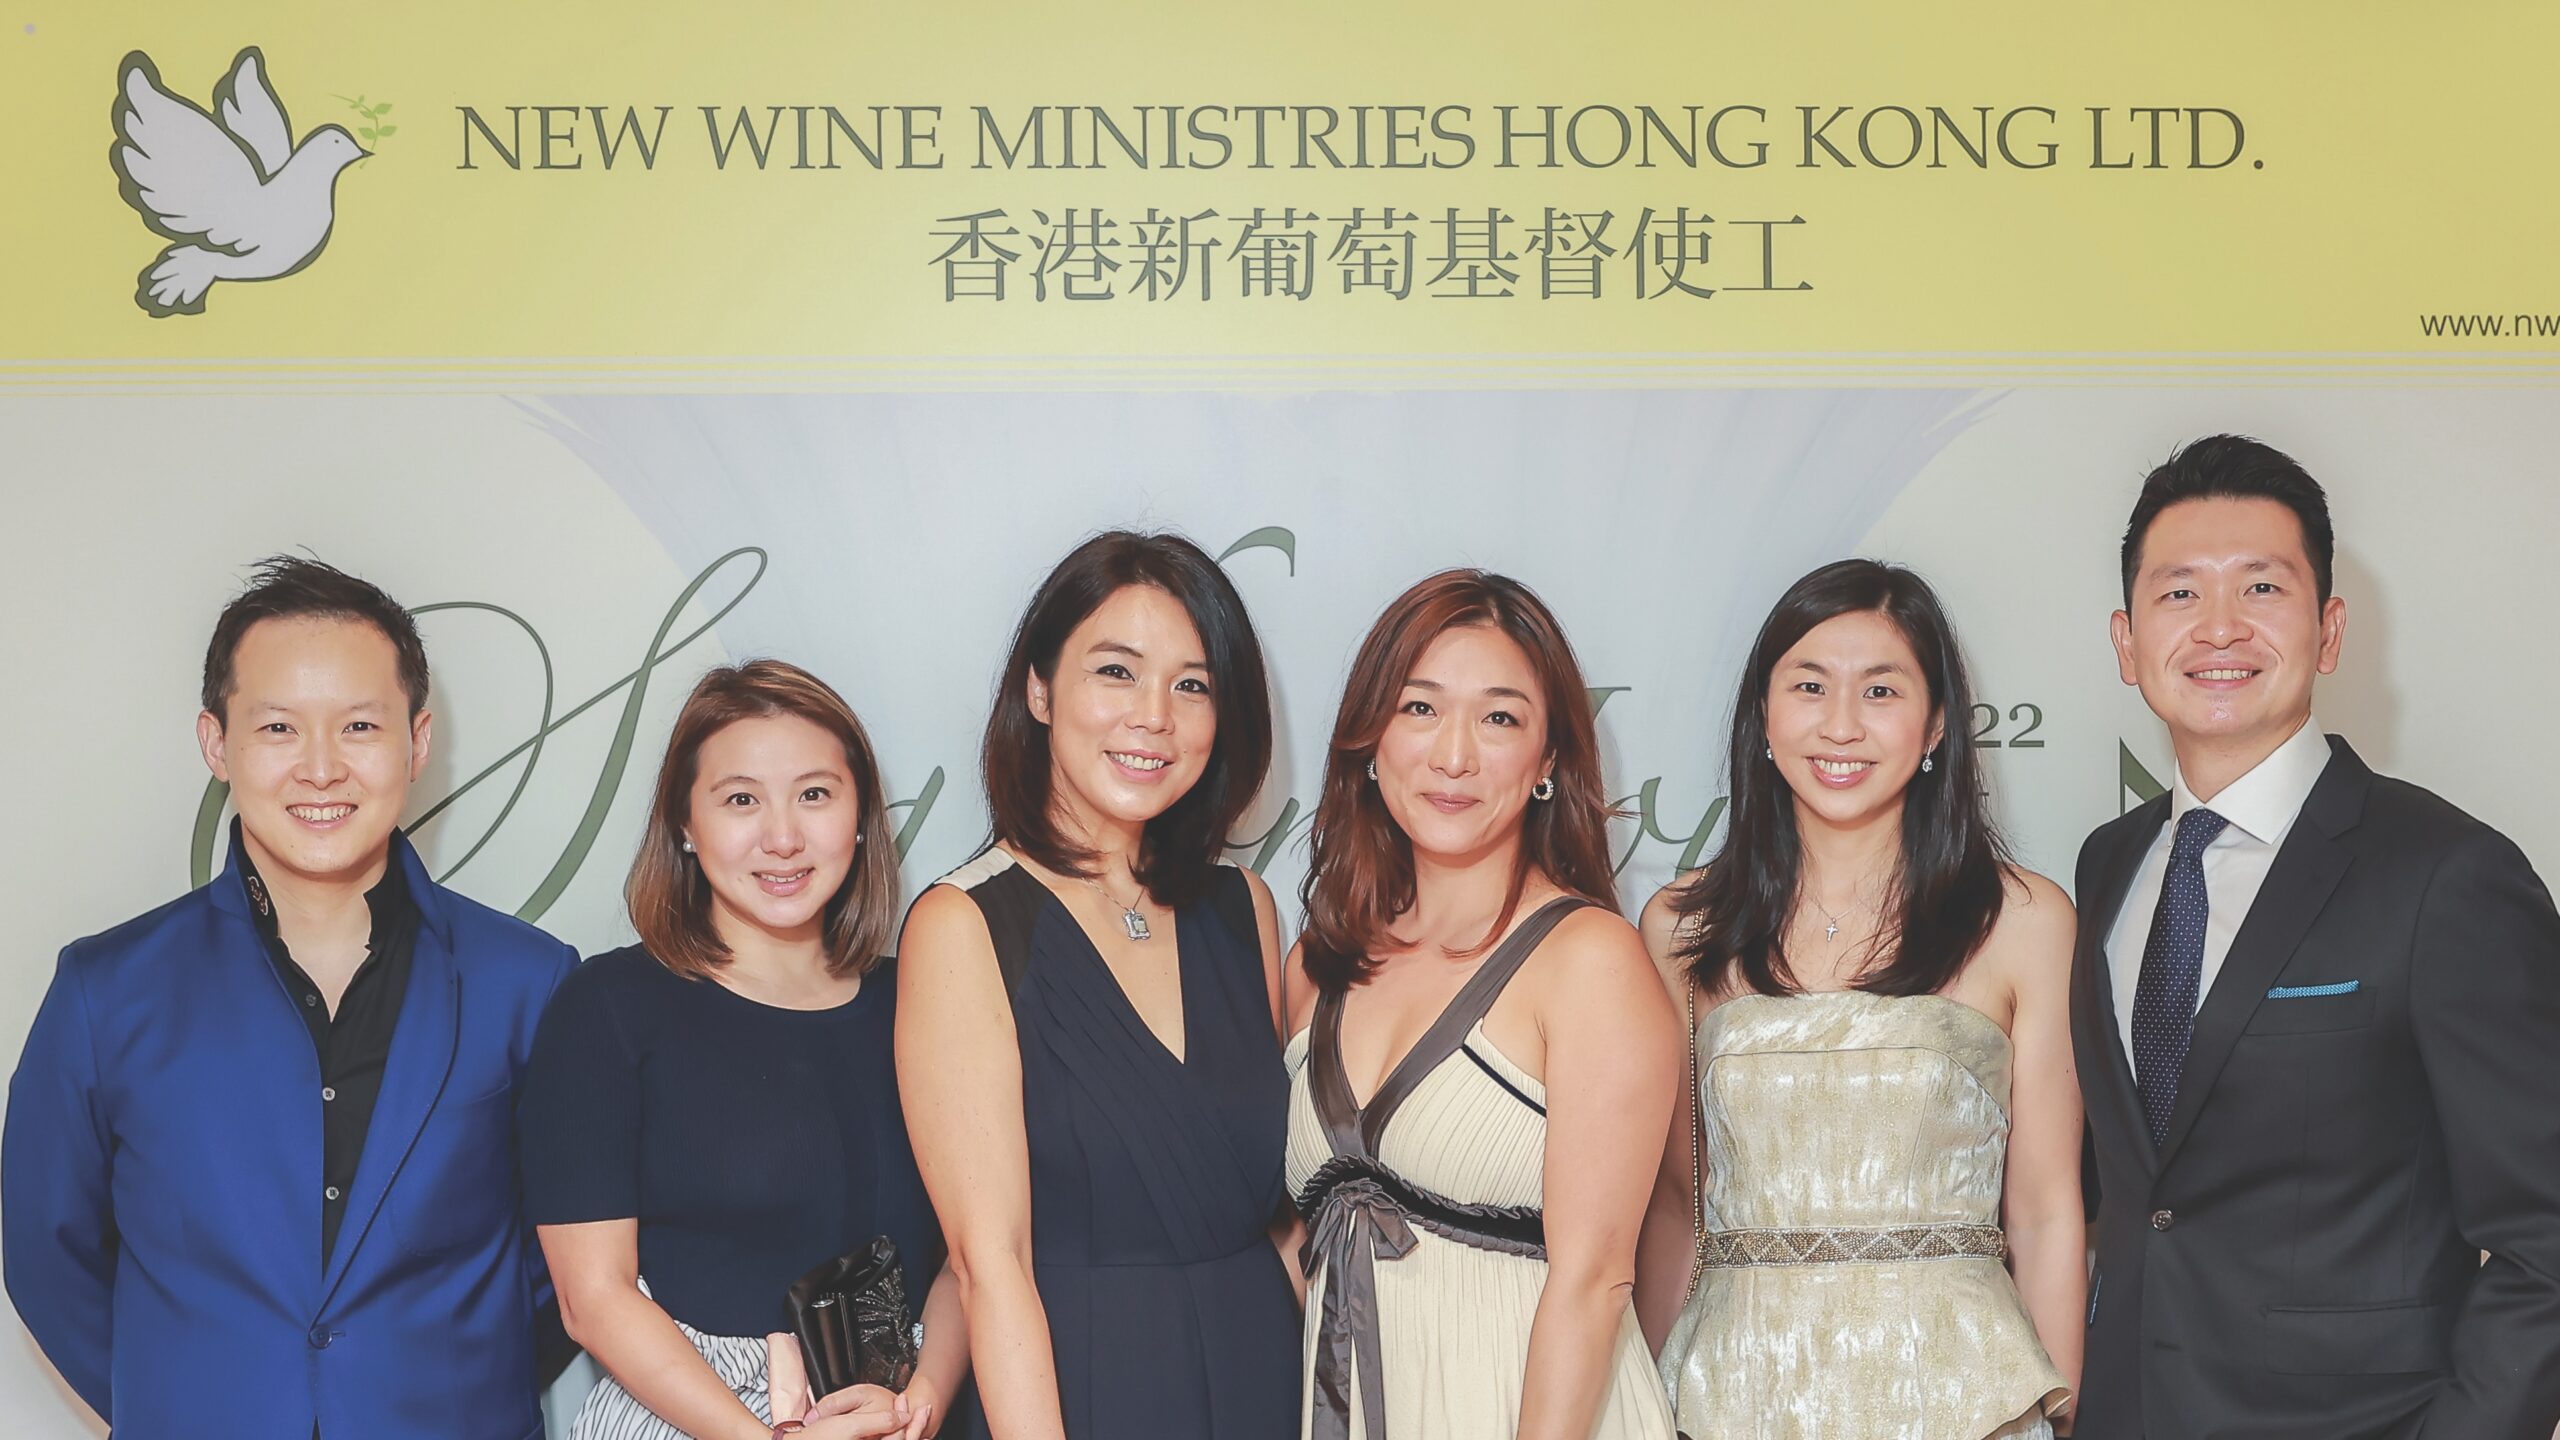 Sing for Joy: Charity Dinner by New Wine Ministries